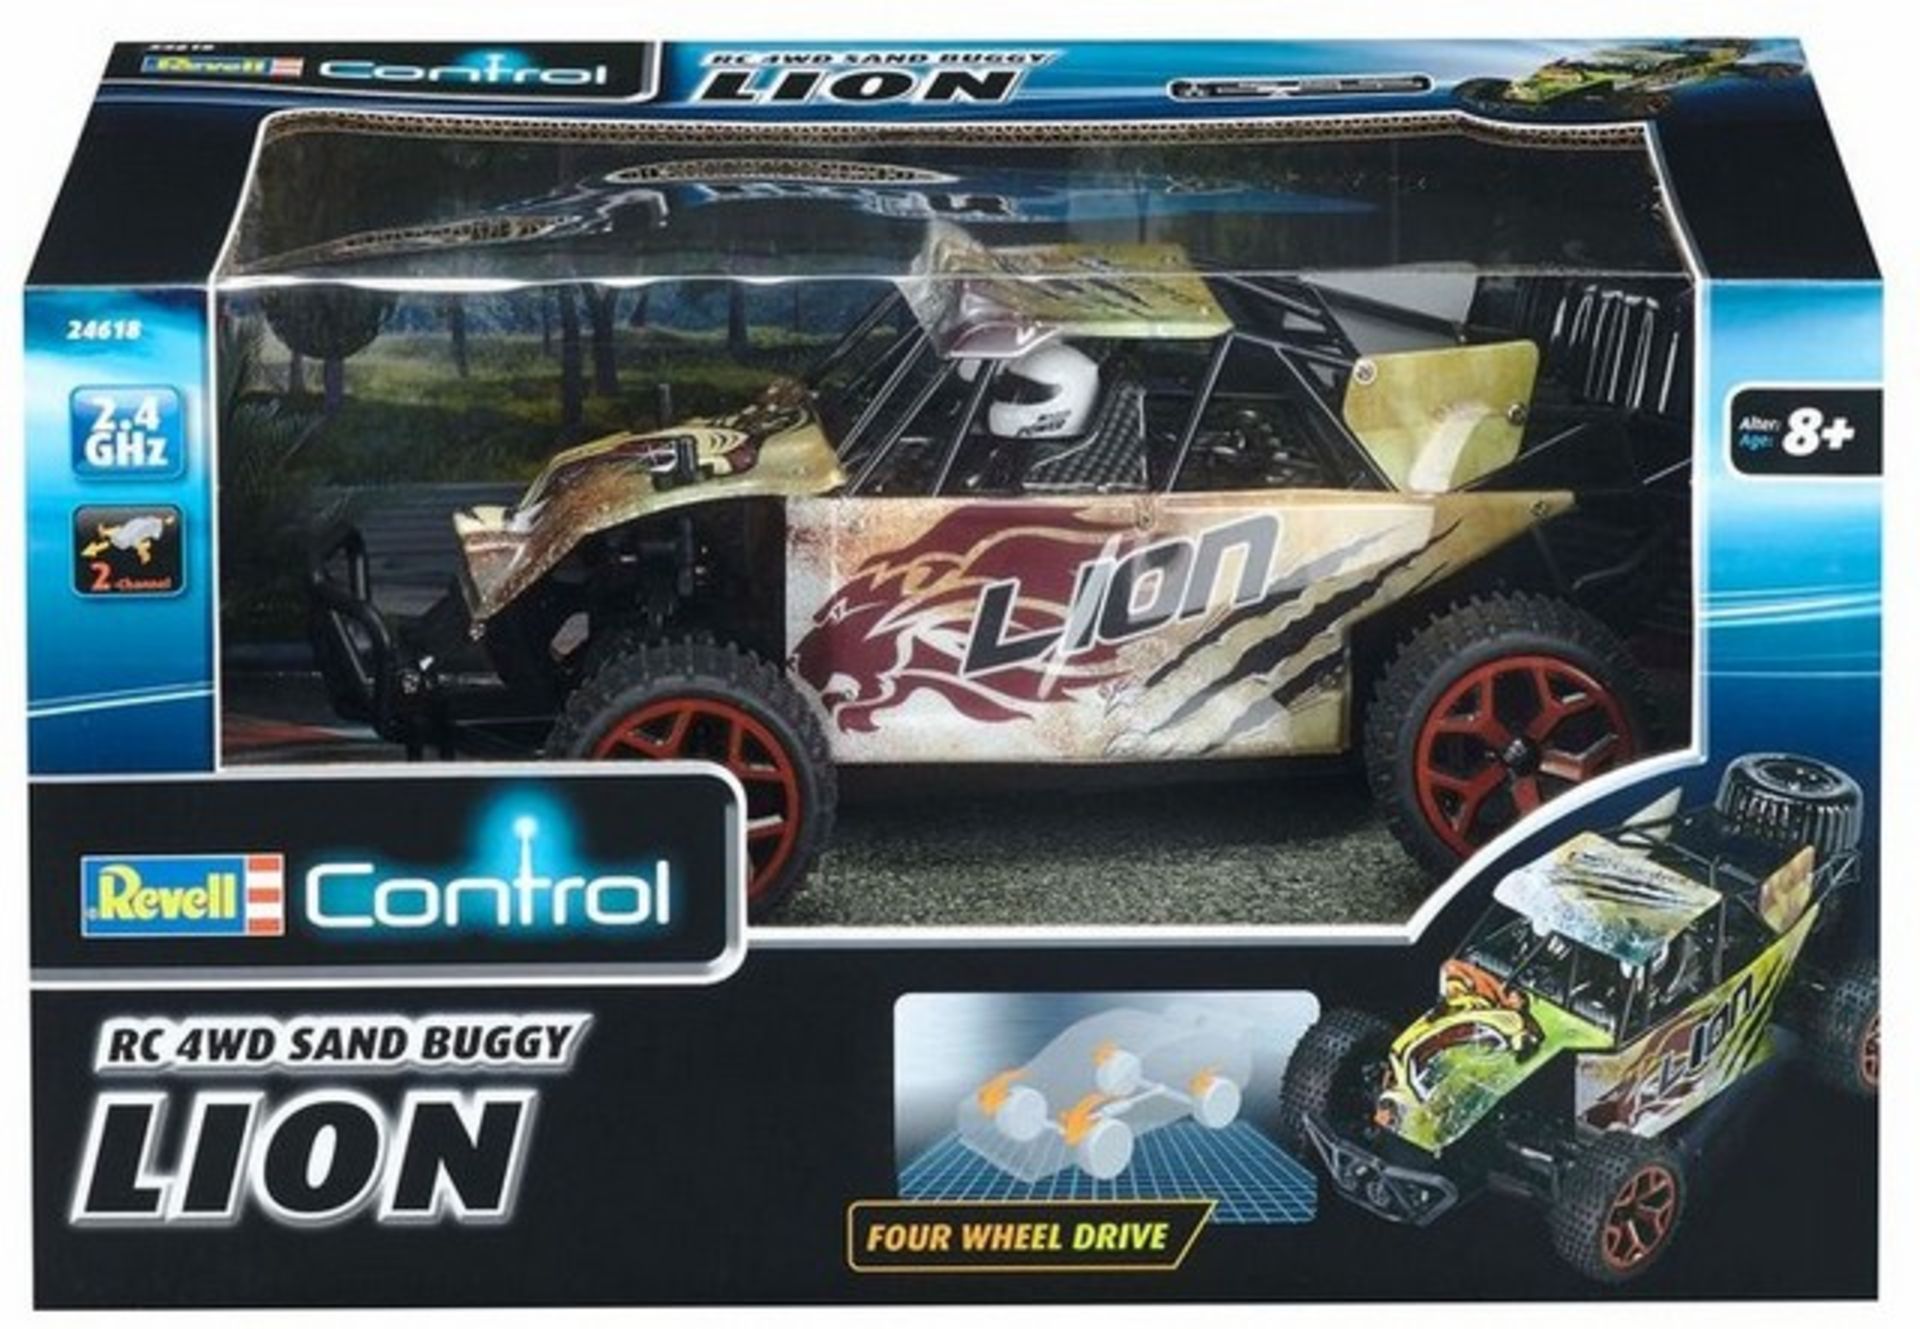 + VAT Brand New Revell R/C 4 Wheel Drive Sand Buggy Lion Up To 15 kph 2.4GHz 2 Channel Remote - Image 4 of 5